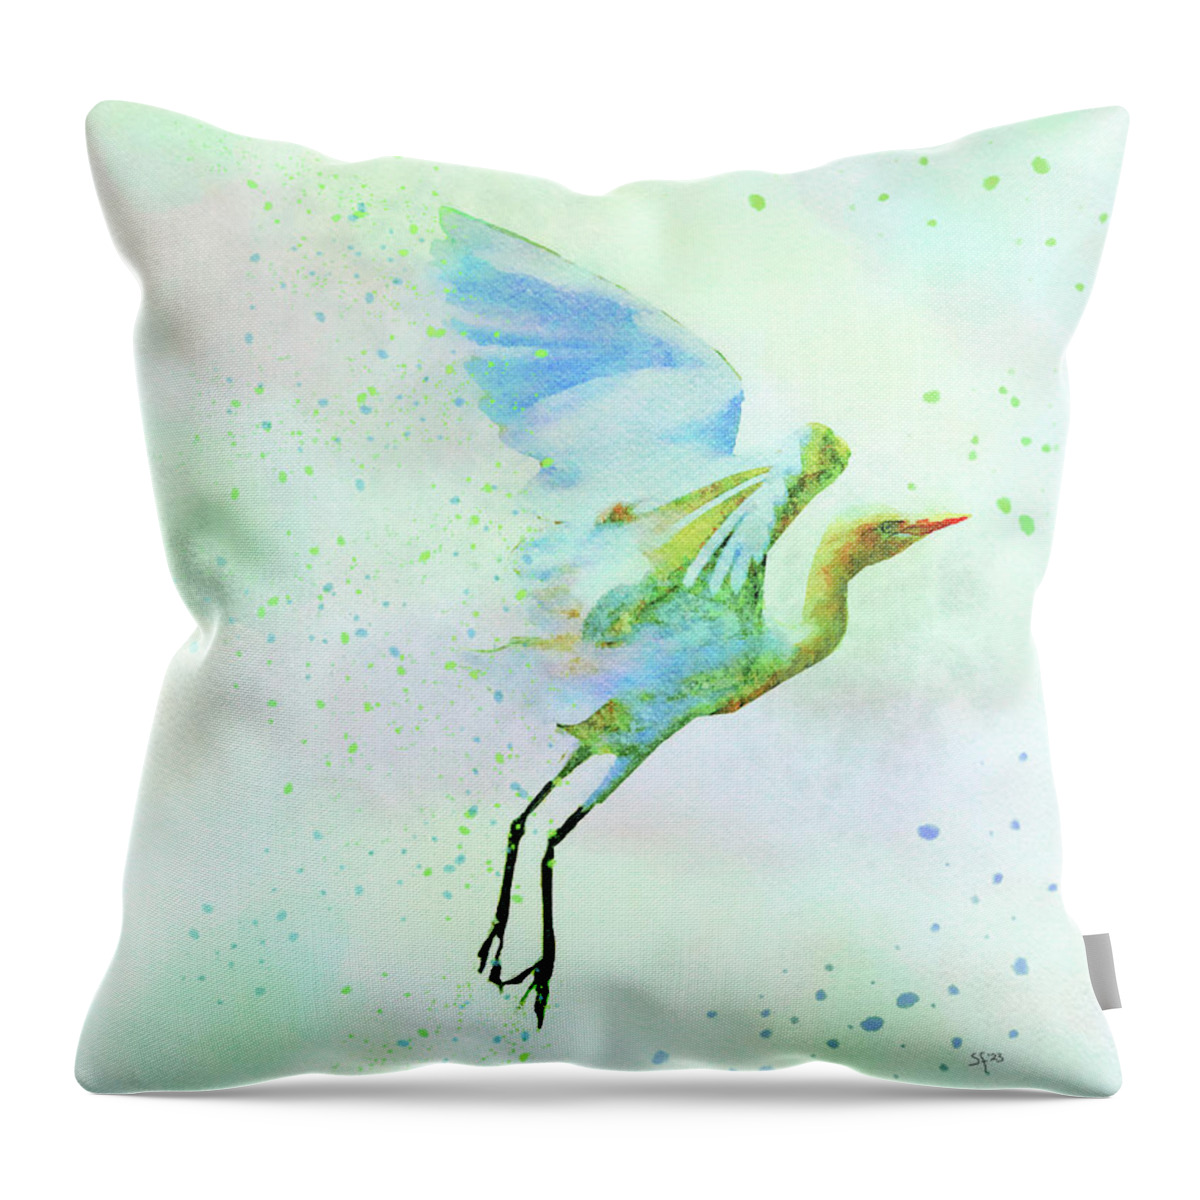 Colorful Throw Pillow featuring the digital art Colorful Crane Watercolor Bird Wildlife Painting by Shelli Fitzpatrick